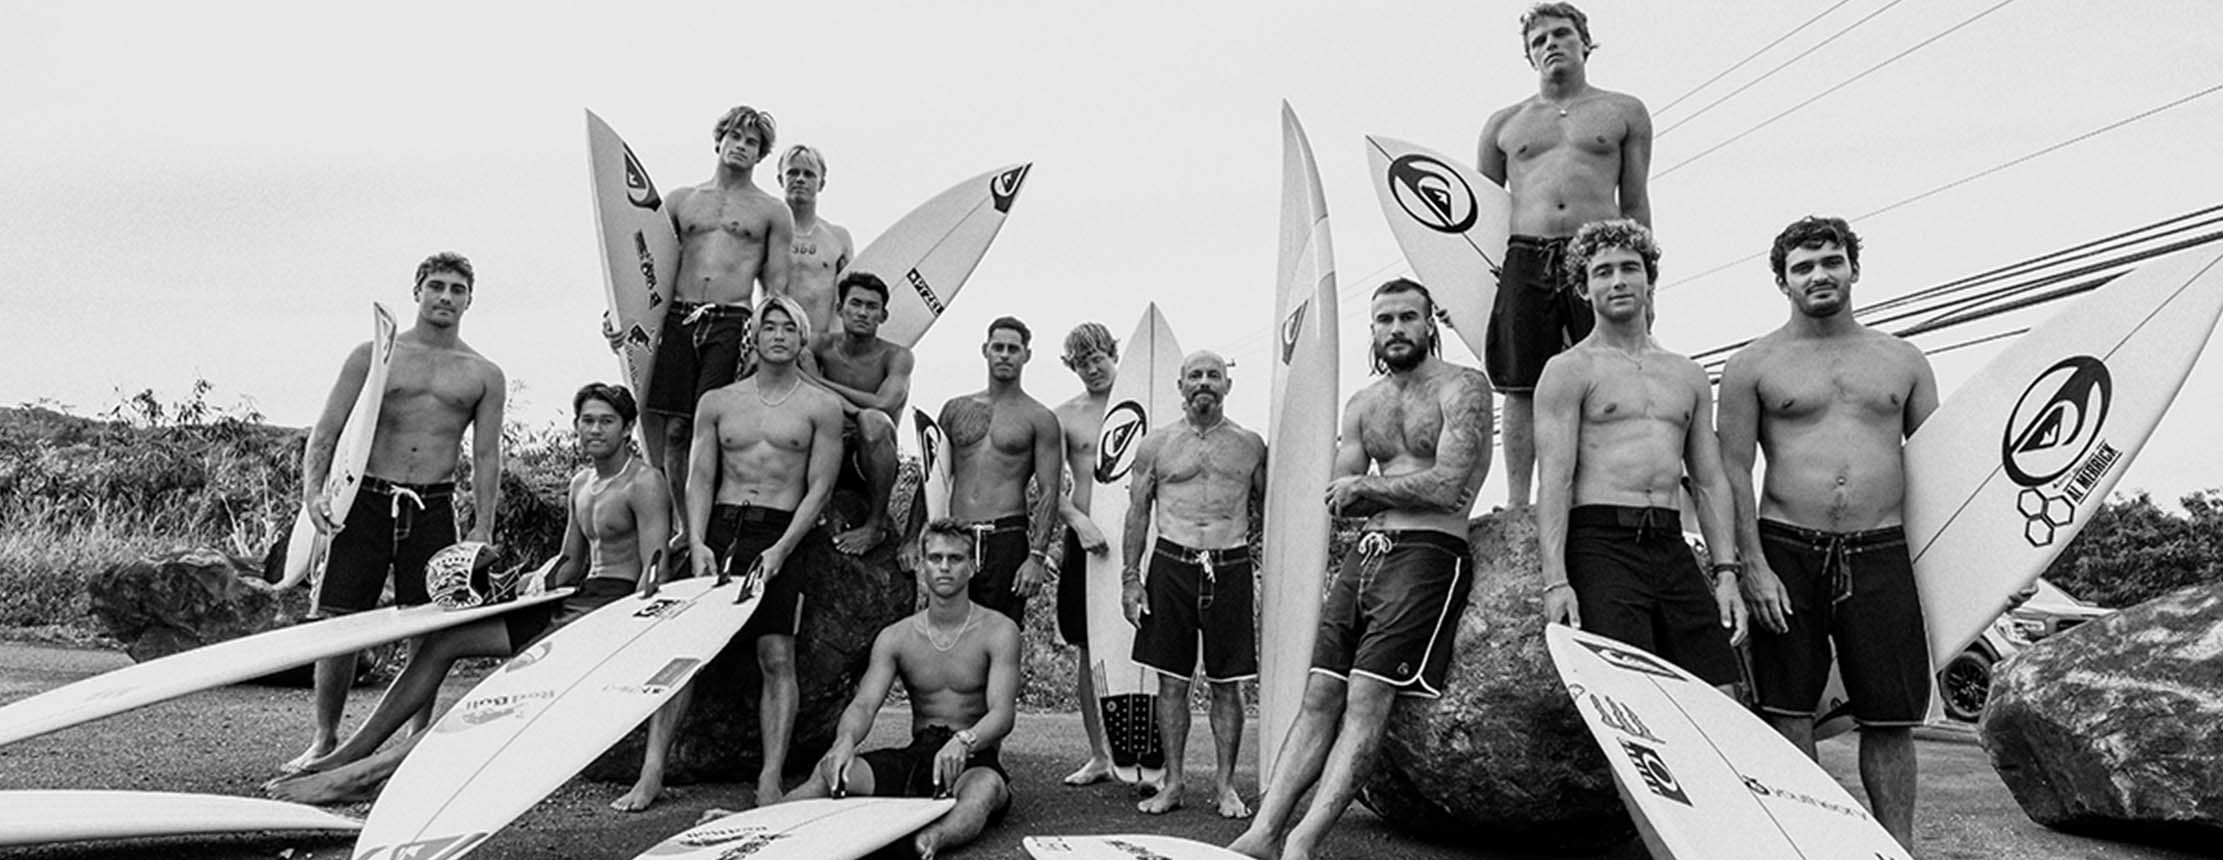 Surfers in their quiksilver boardshorts